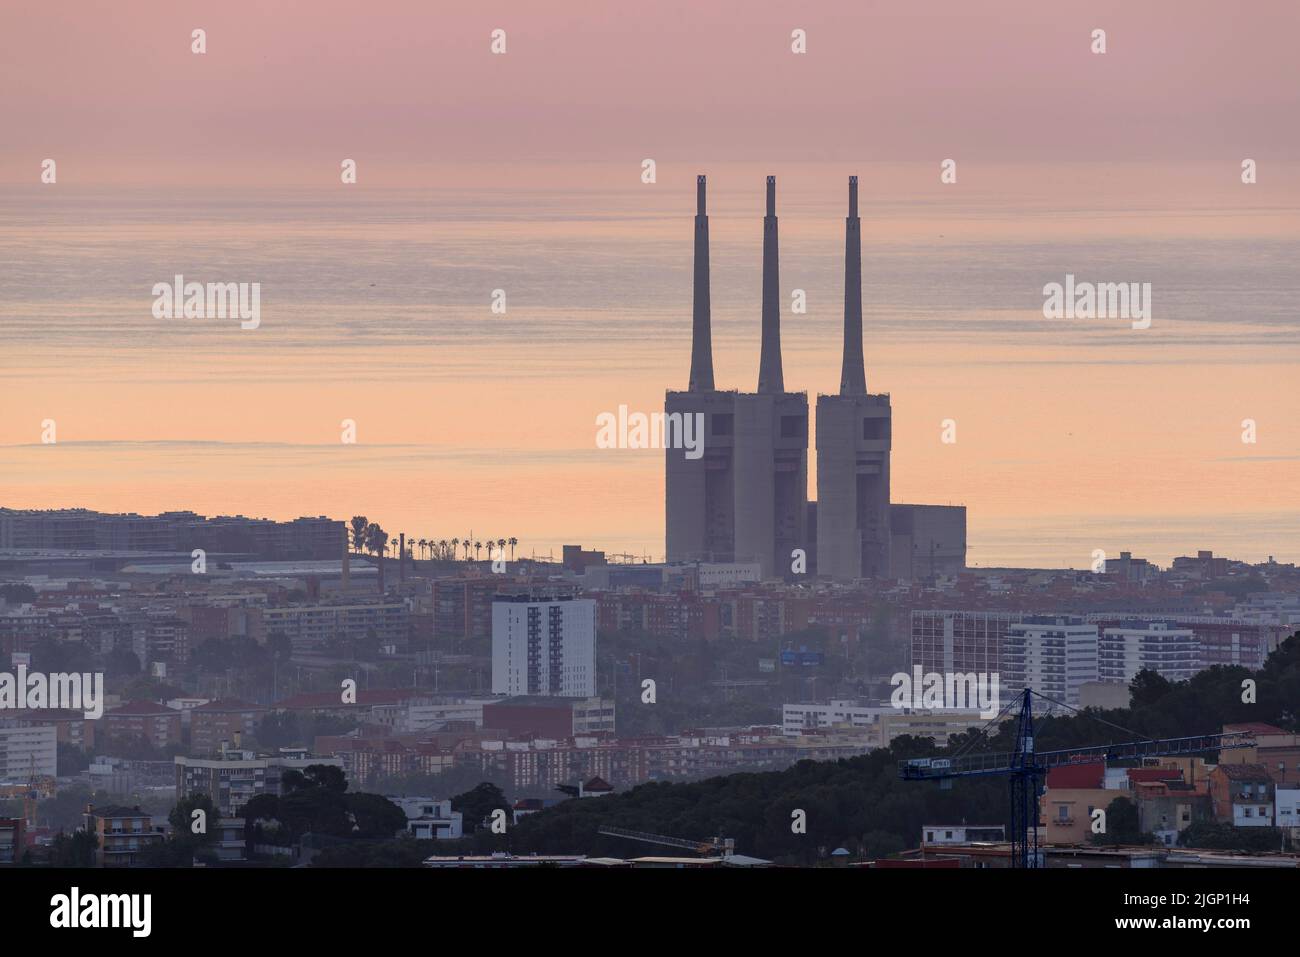 Sunrise over Barcelona region seen from the Tibidabo mountain. In the background, the Sant Adrià de Besòs Thermal power station (Barcelona, Spain) Stock Photo